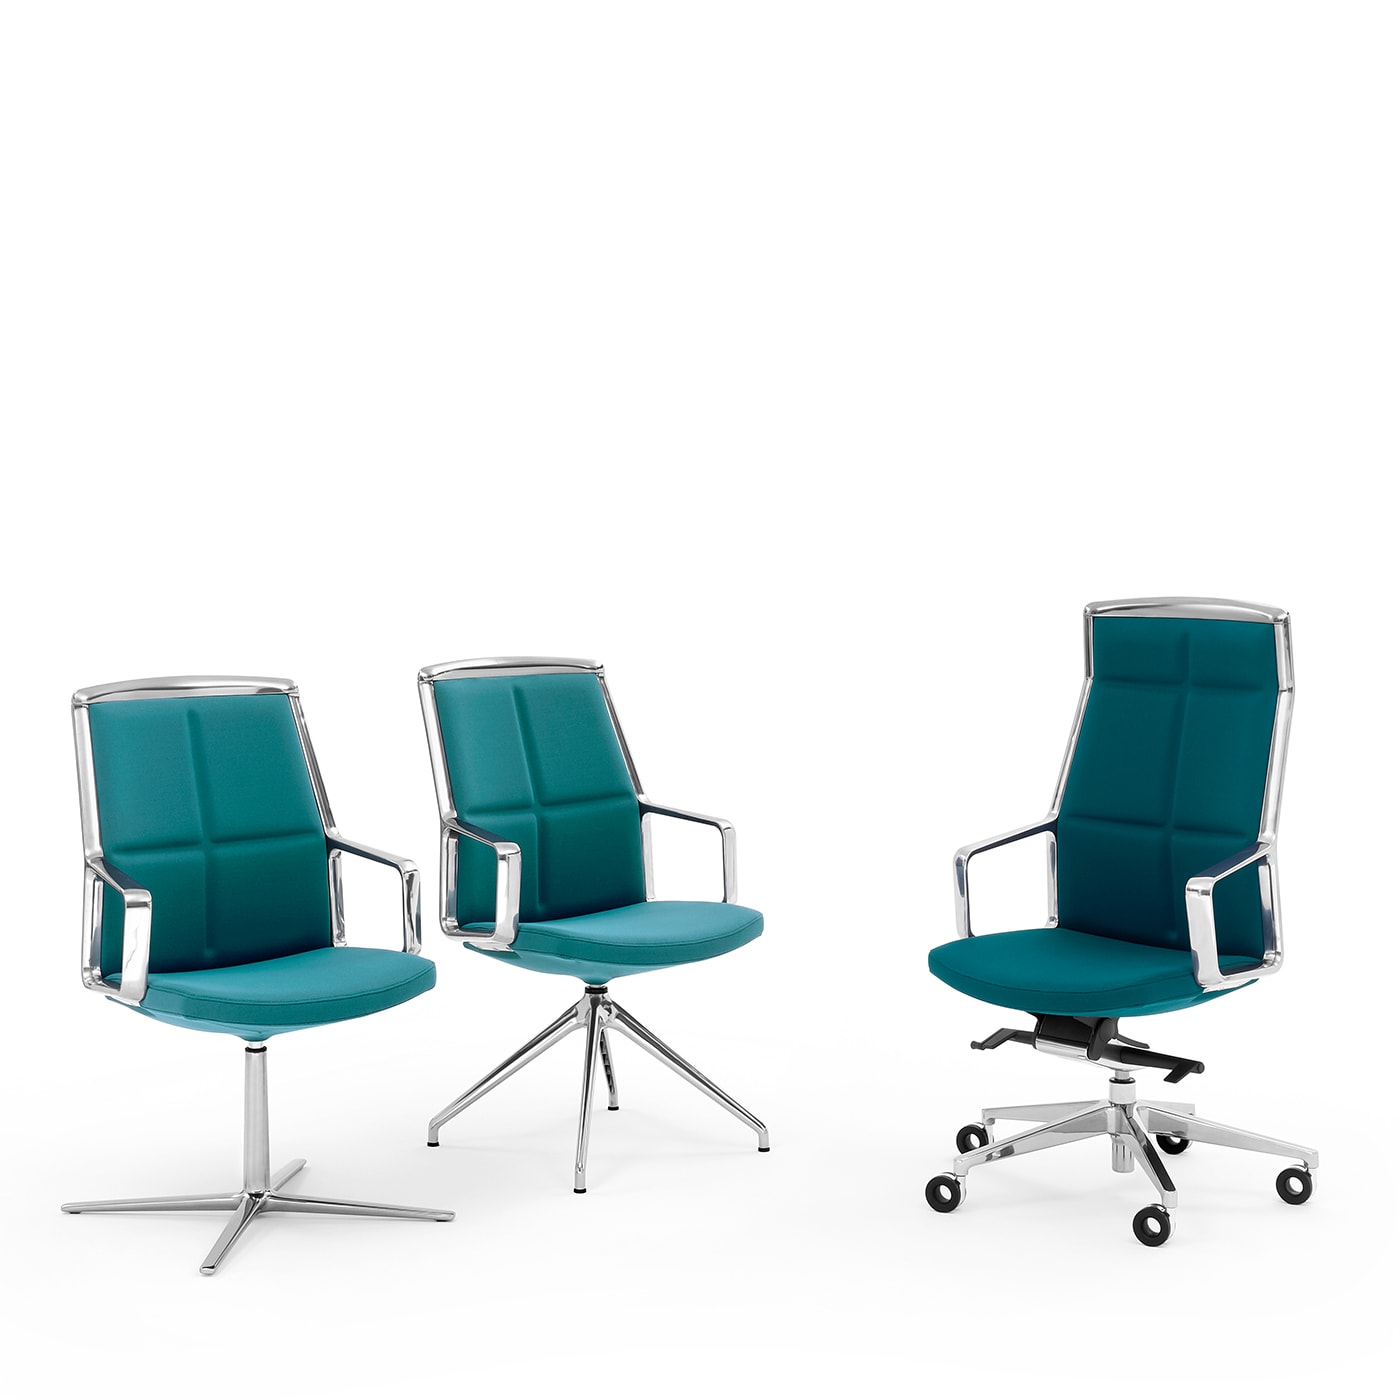 ADELE BLUE-GREEN MEETING CHAIR #2 by ORLANDINIDESIGN - Viganò & C.